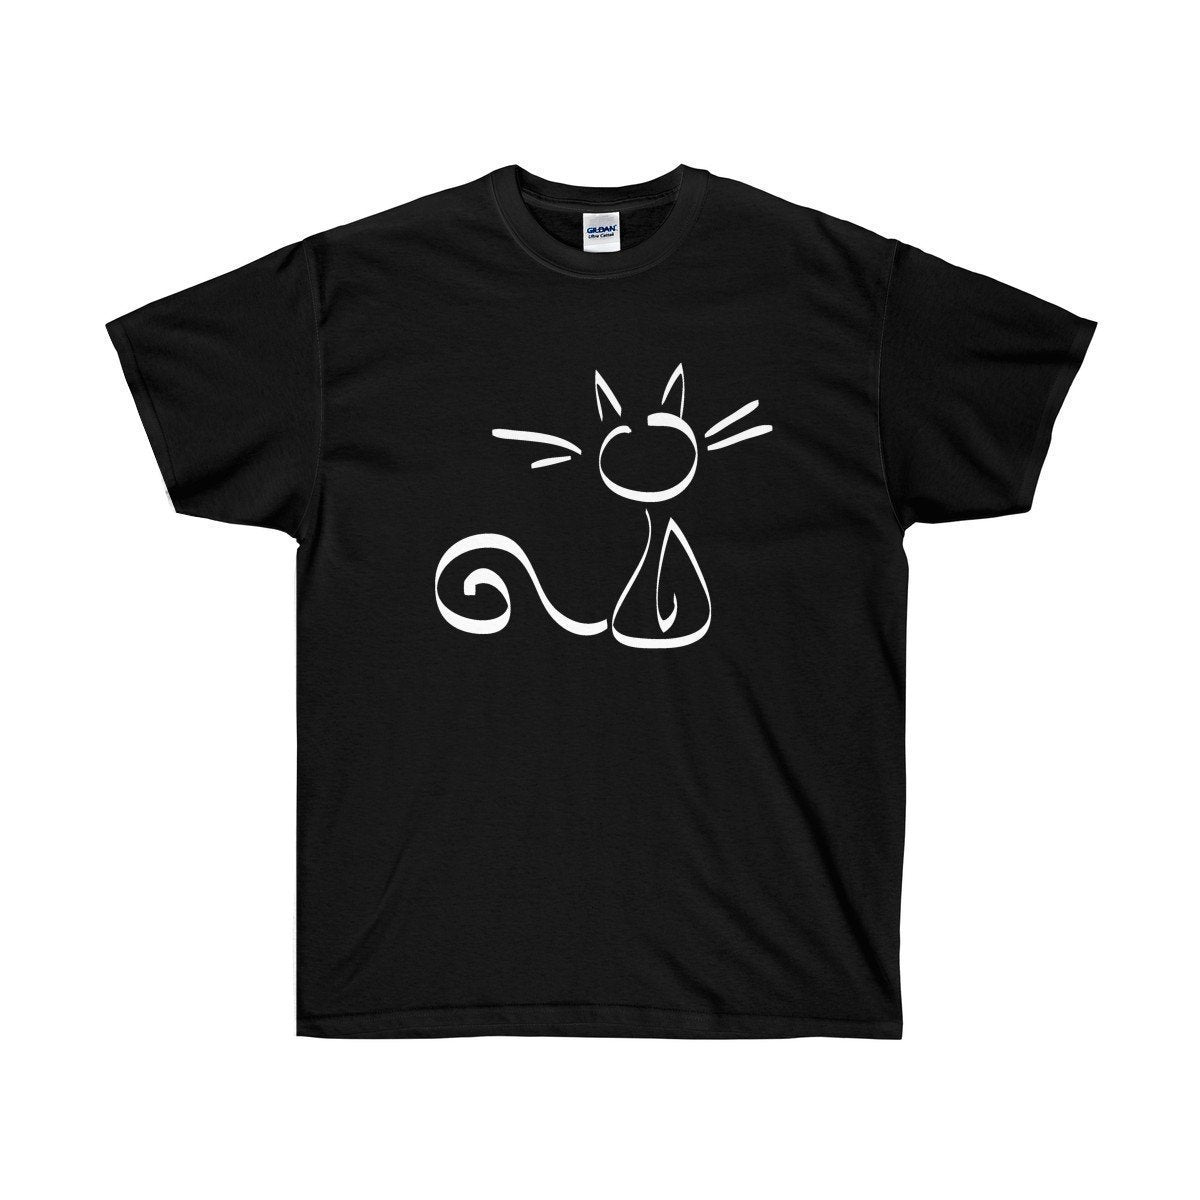 Cat T-Shirt, Funny Cat Shirt for Cat Lovers with a White Cat Printed On the Front